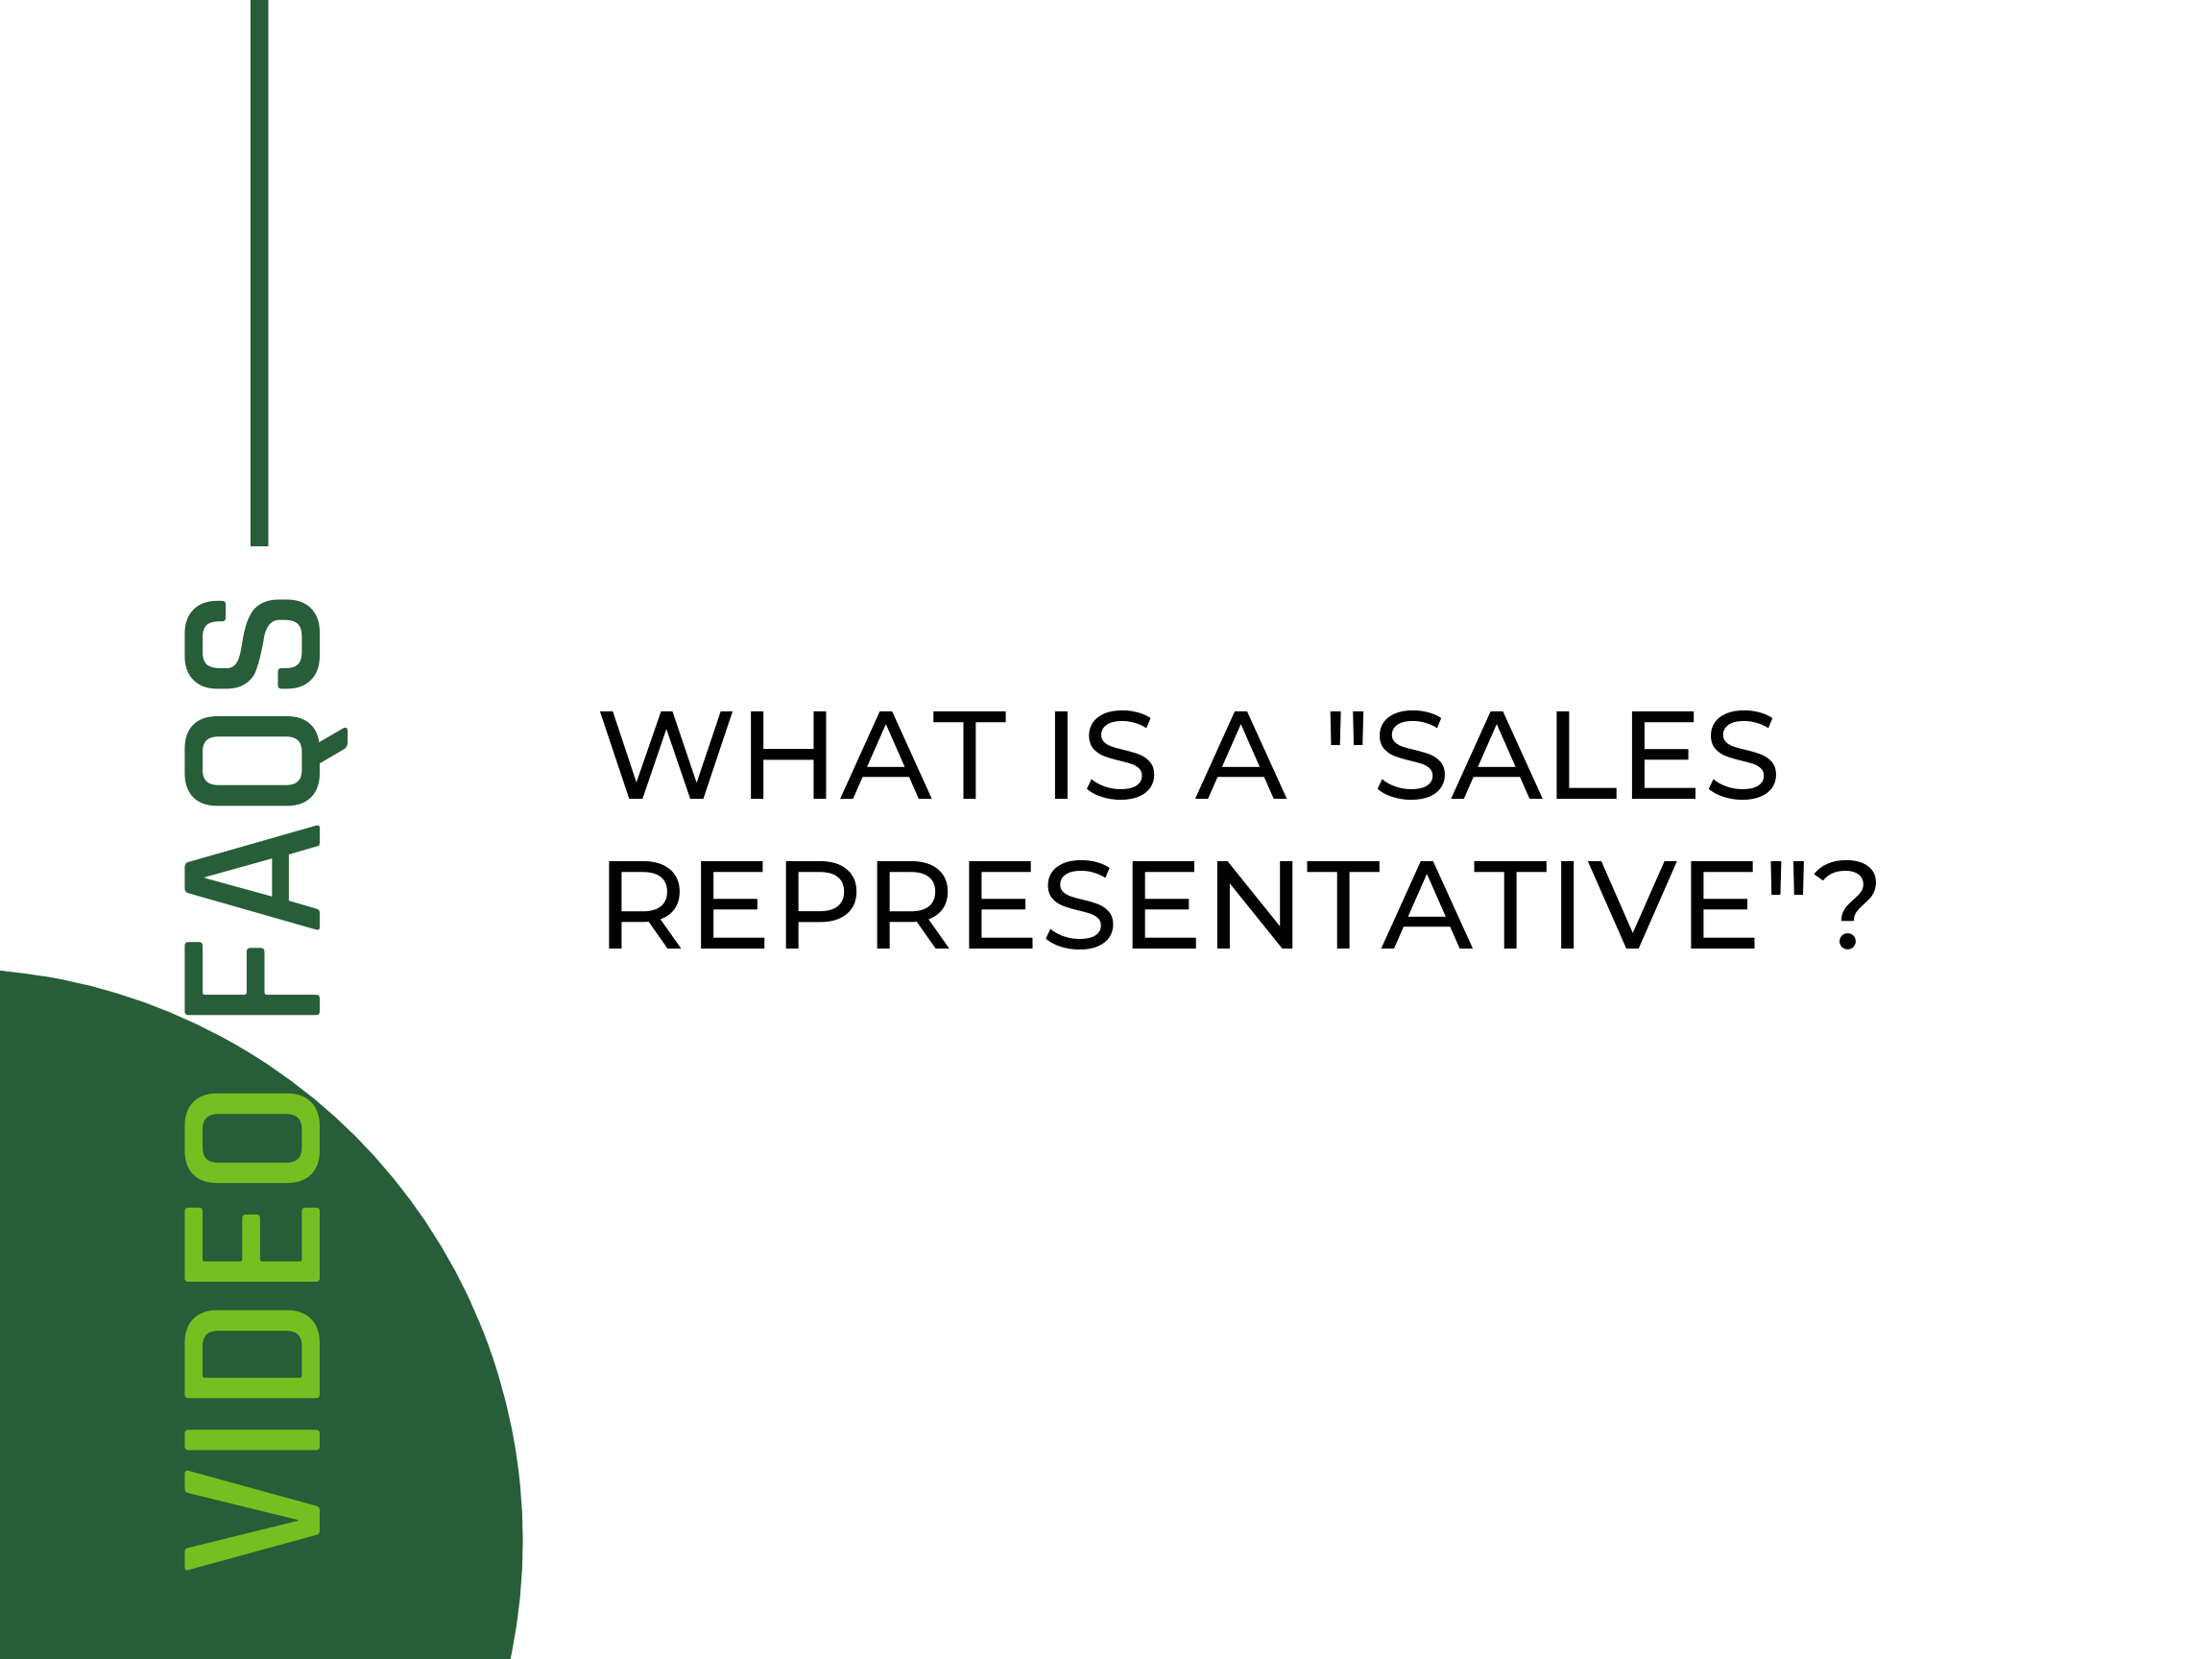 What is a Sales Representitive?